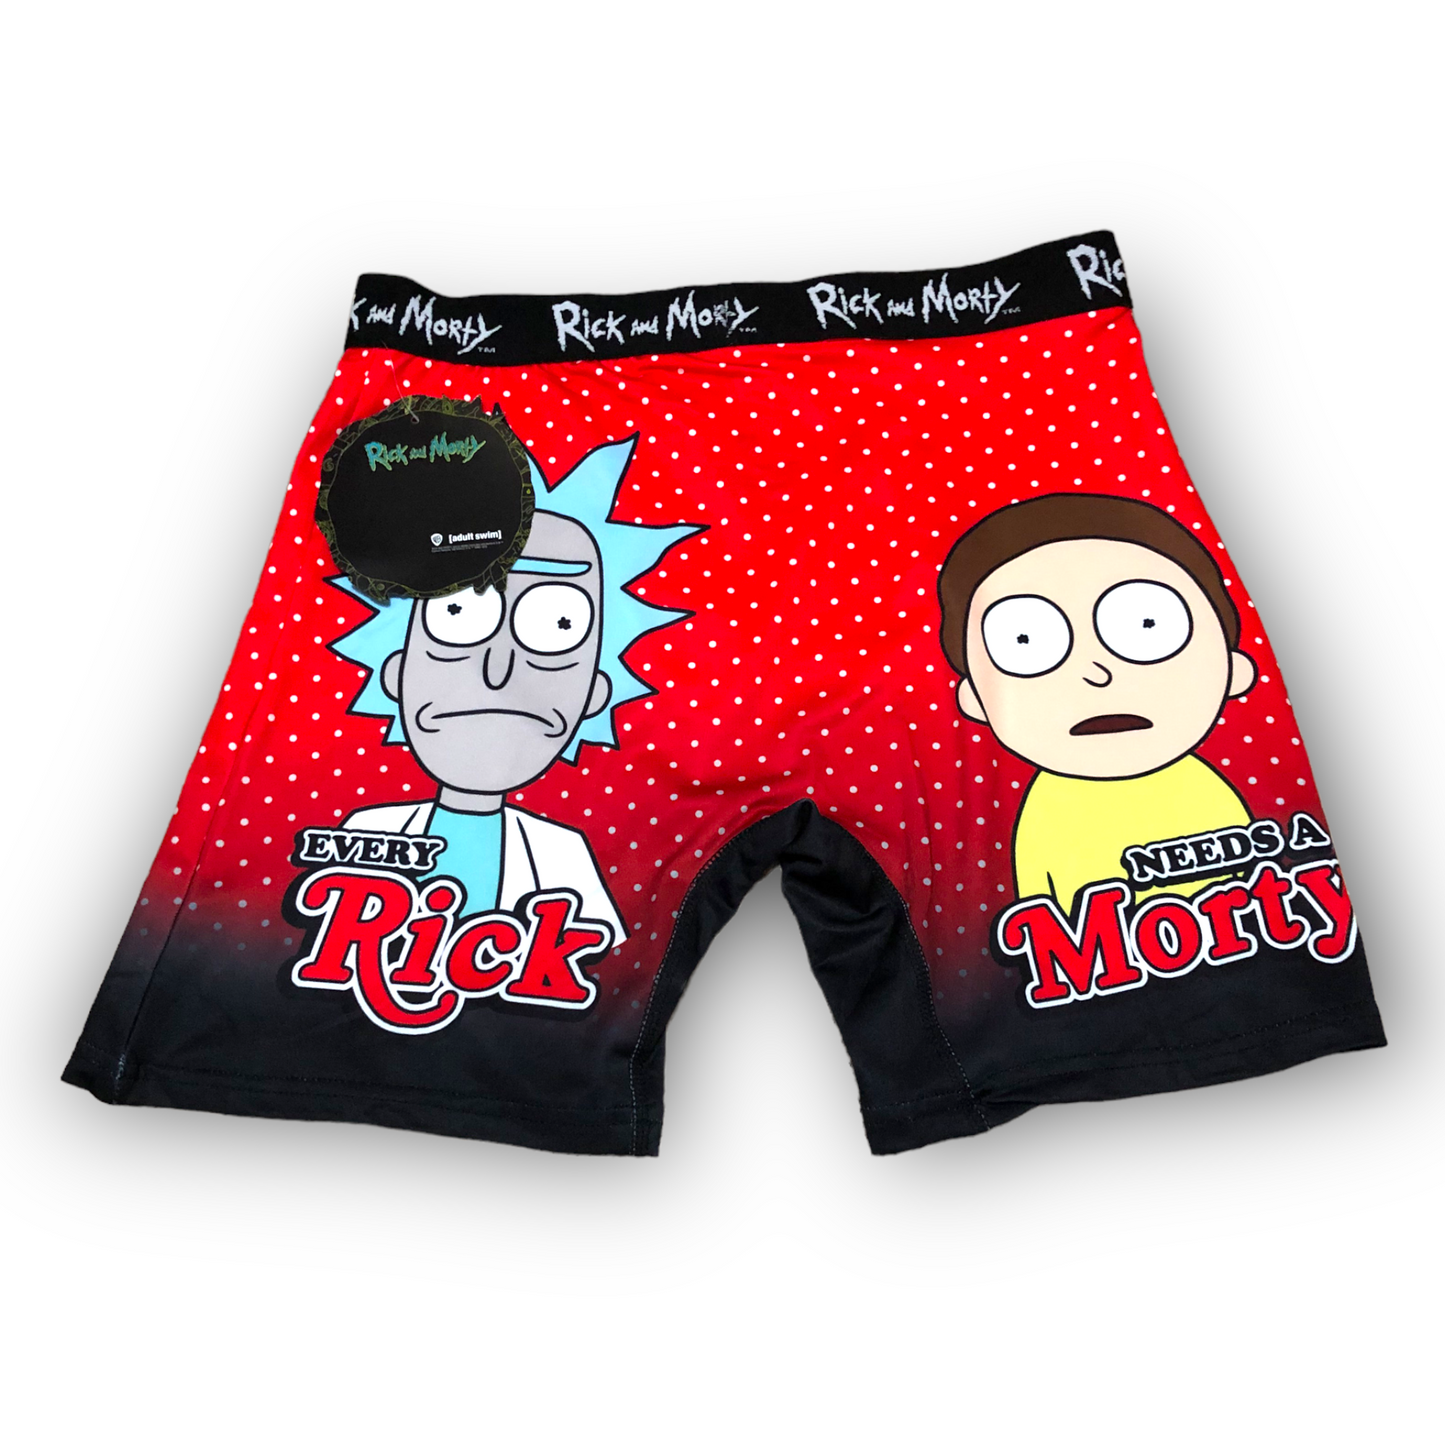 Rick and Morty "Every Rick Needs A Morty" Men's Boxer Briefs